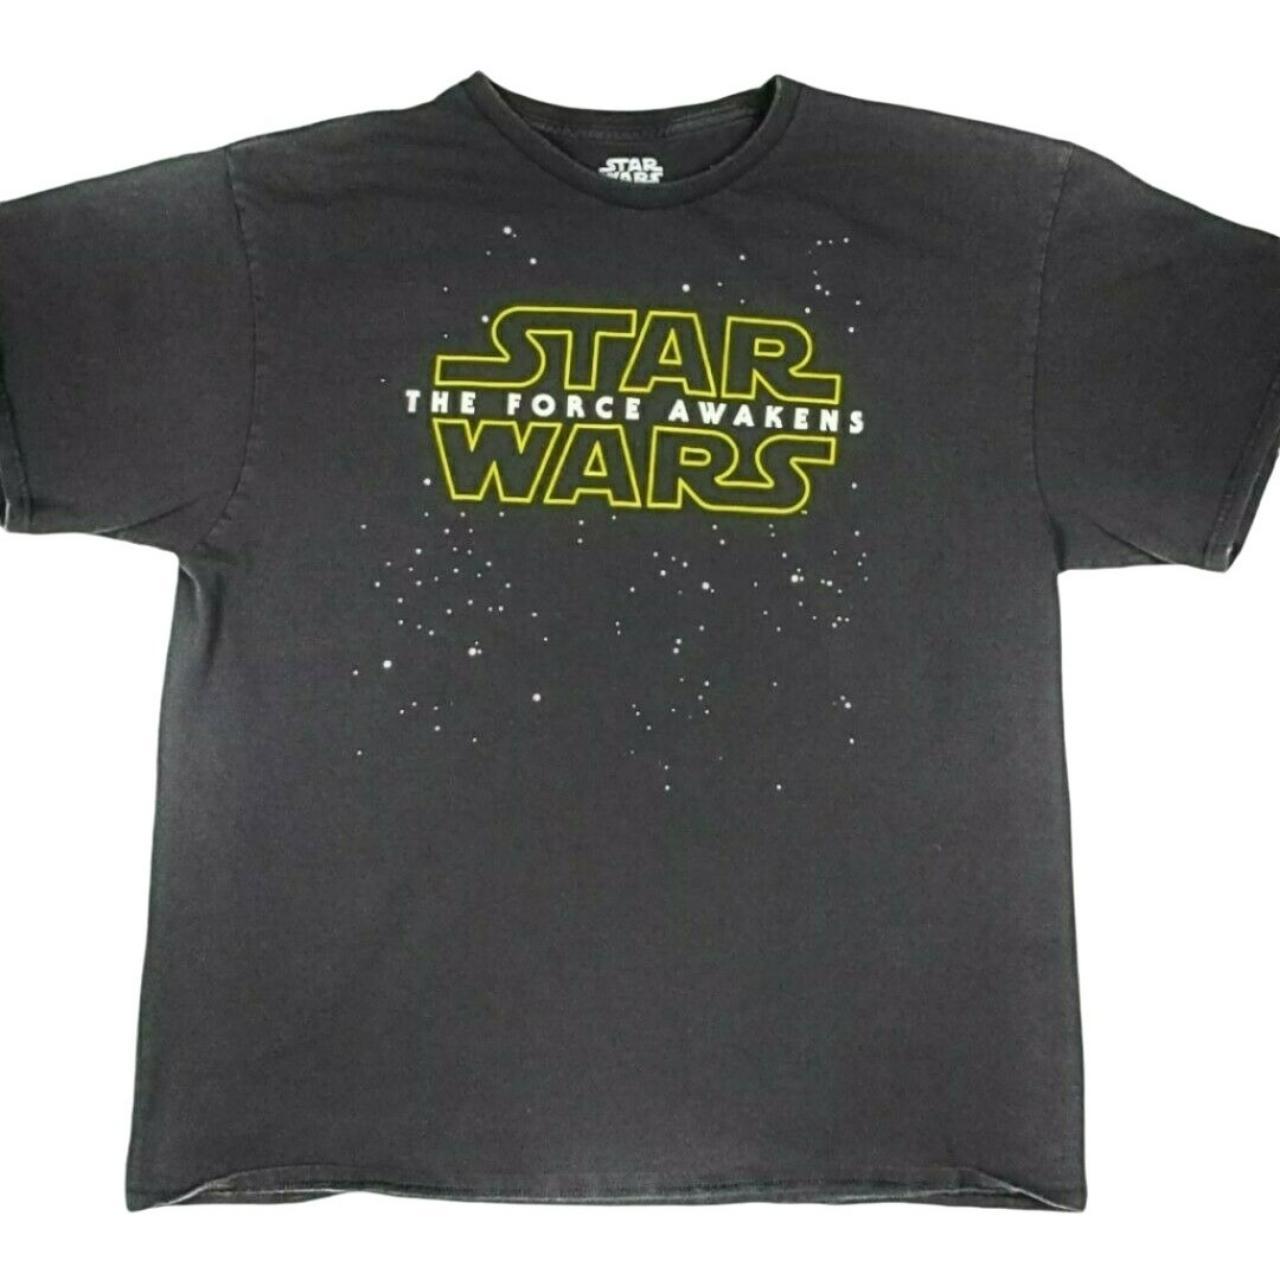 Product Image 1 - Star Wars The Force Awakens